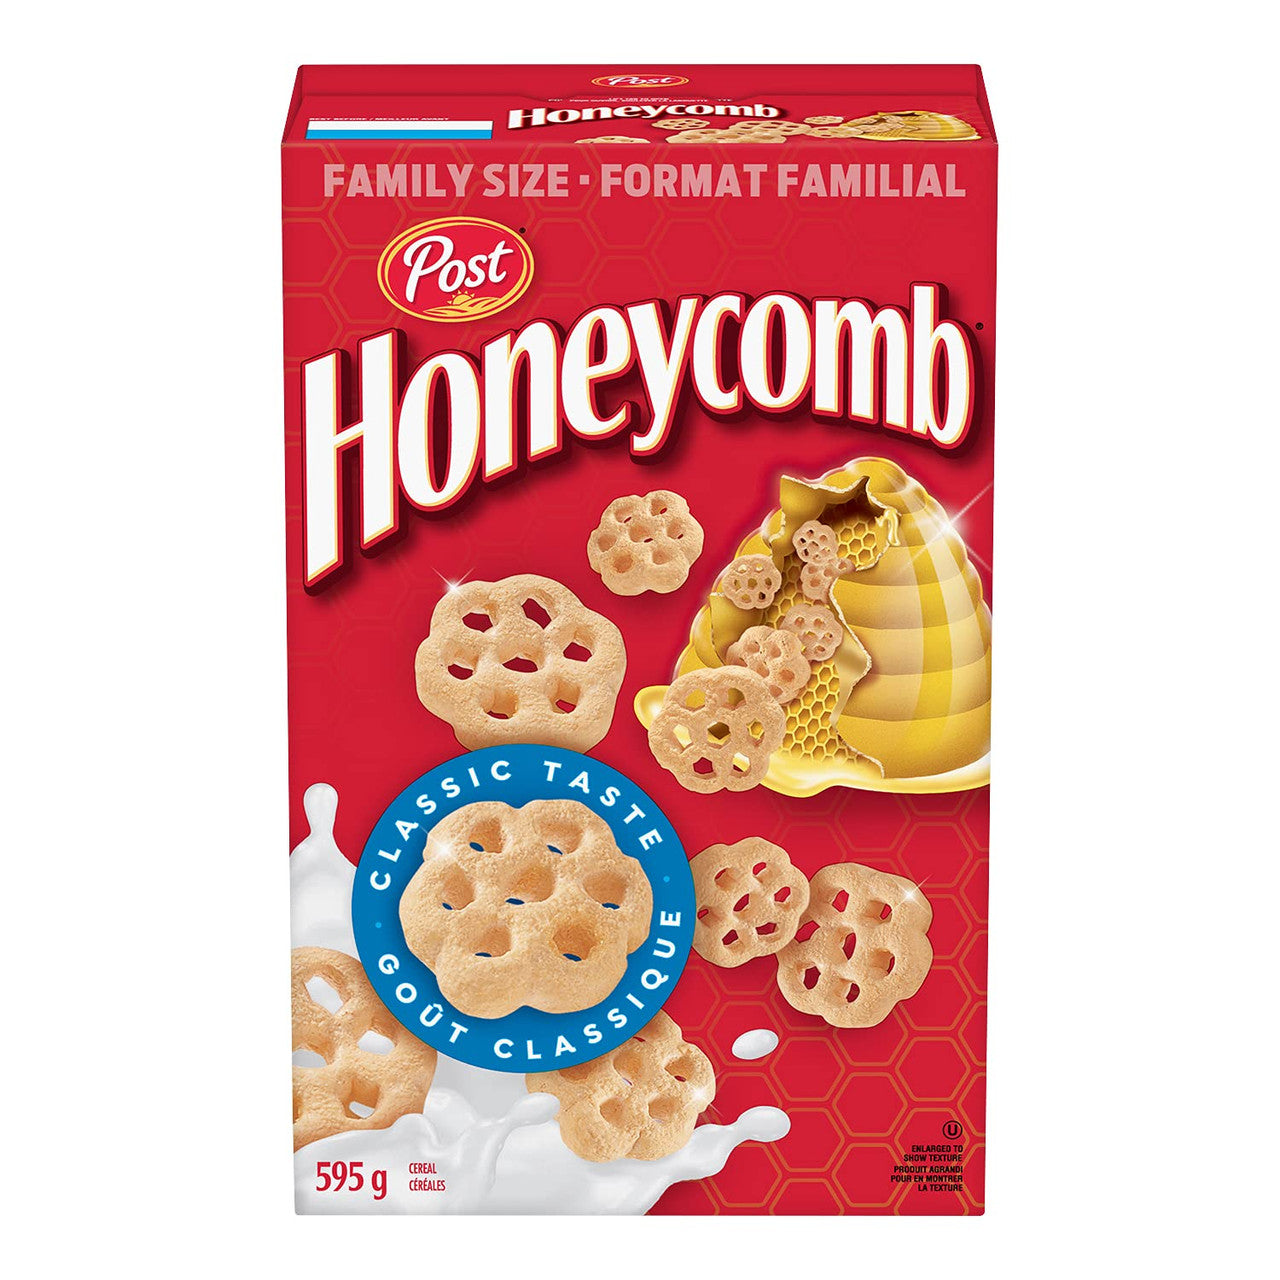 Post Honeycomb Cereal Family Size, 595g/21 oz., Box {Imported from Canada}